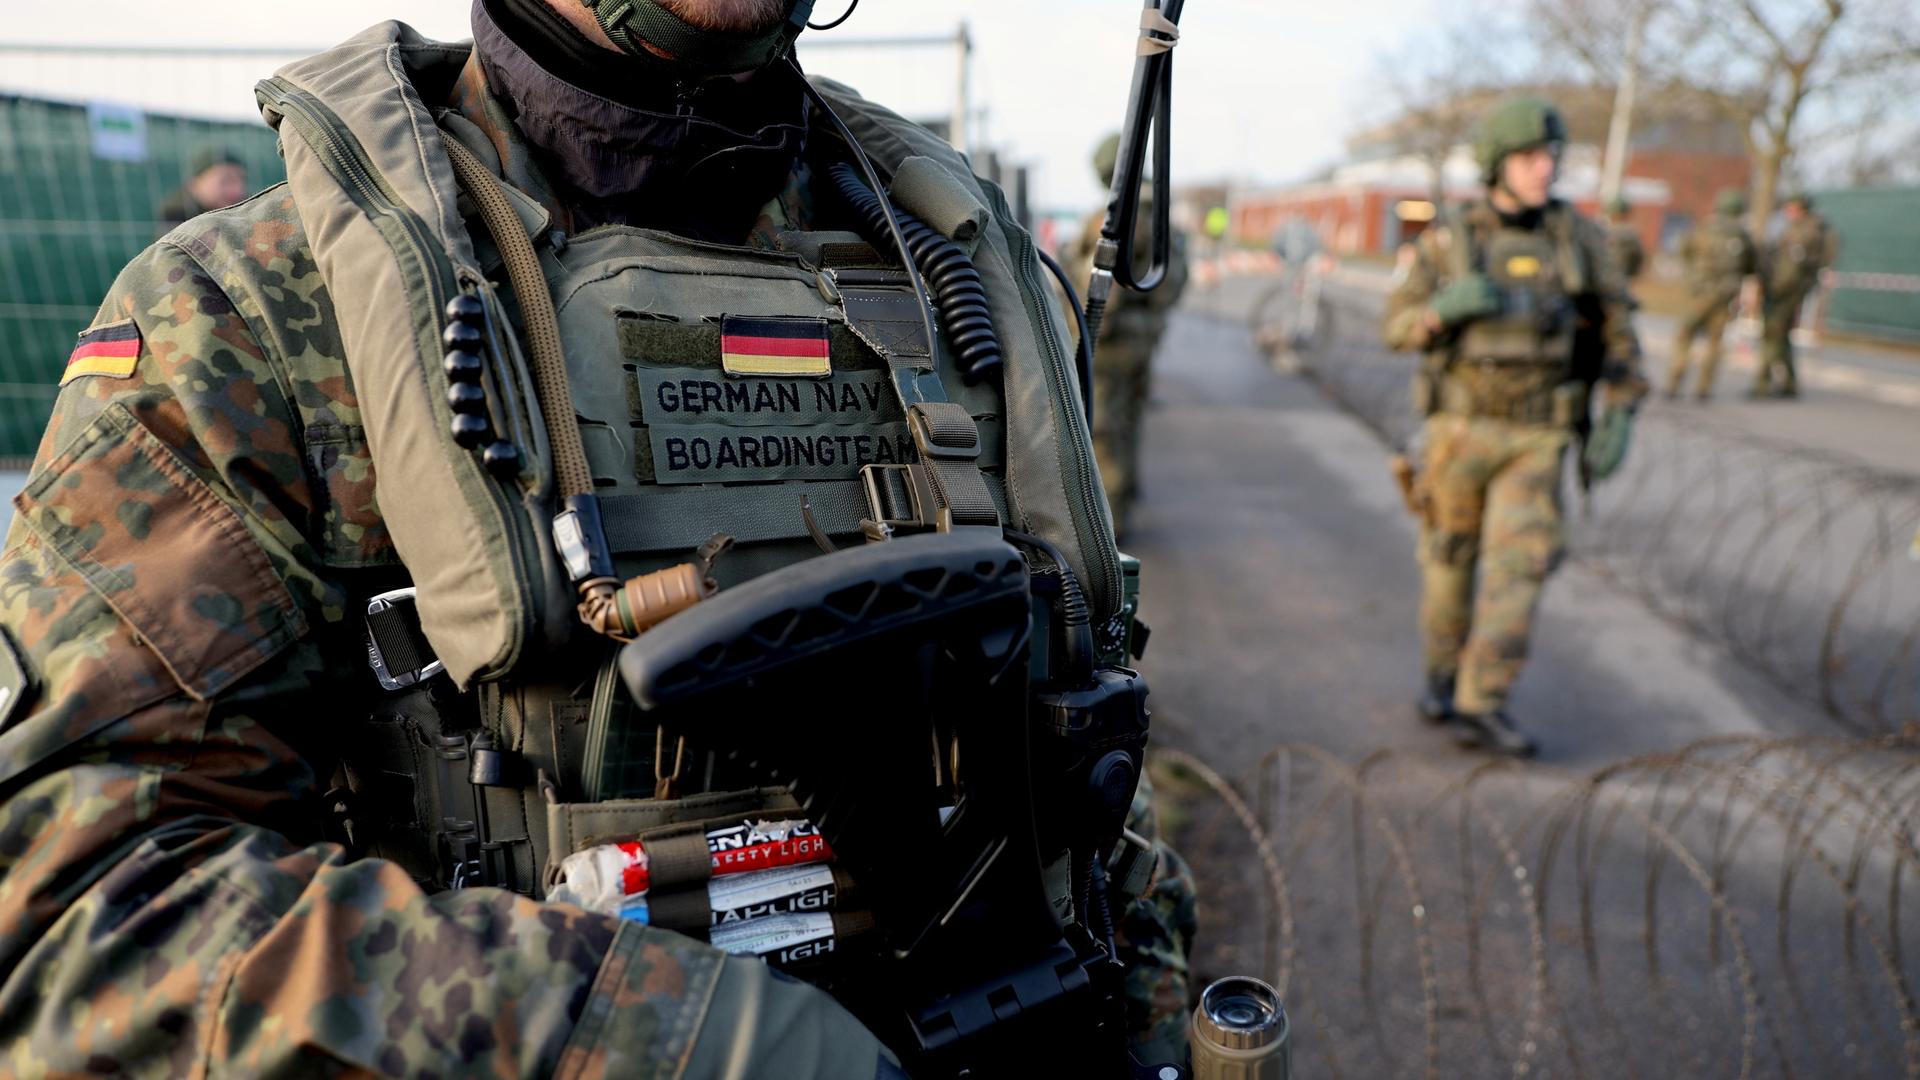 Military Exercises – US and Germany plan major maneuvers with allies